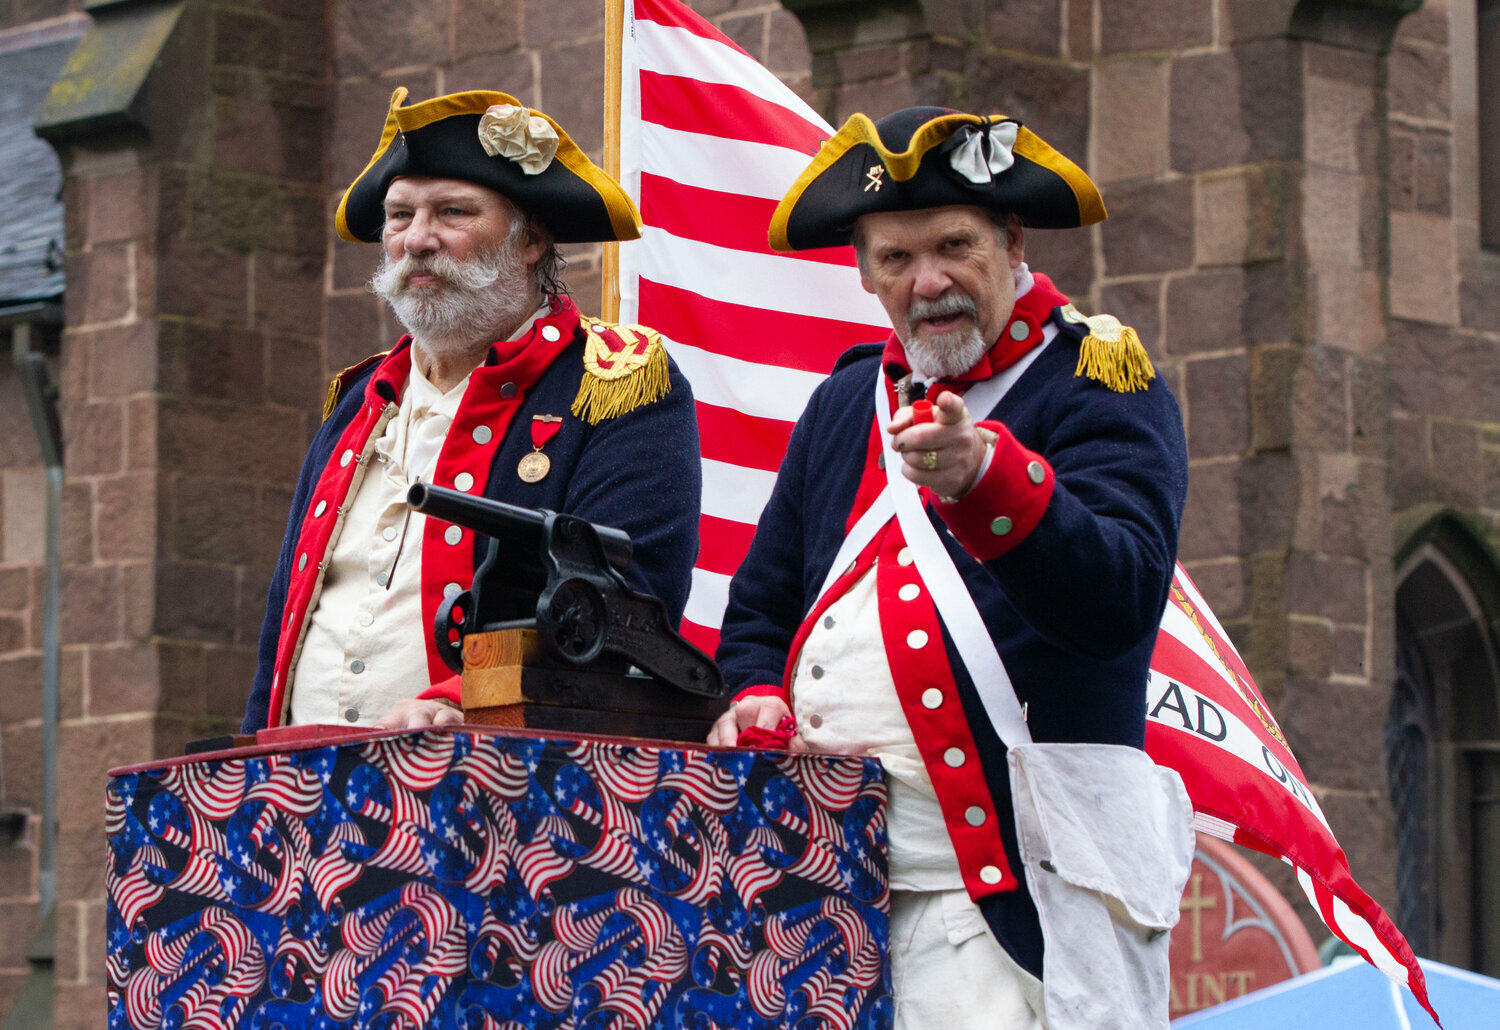 The Town of Bristol wants YOU to help plan the celebration for America’s 250th birthday.